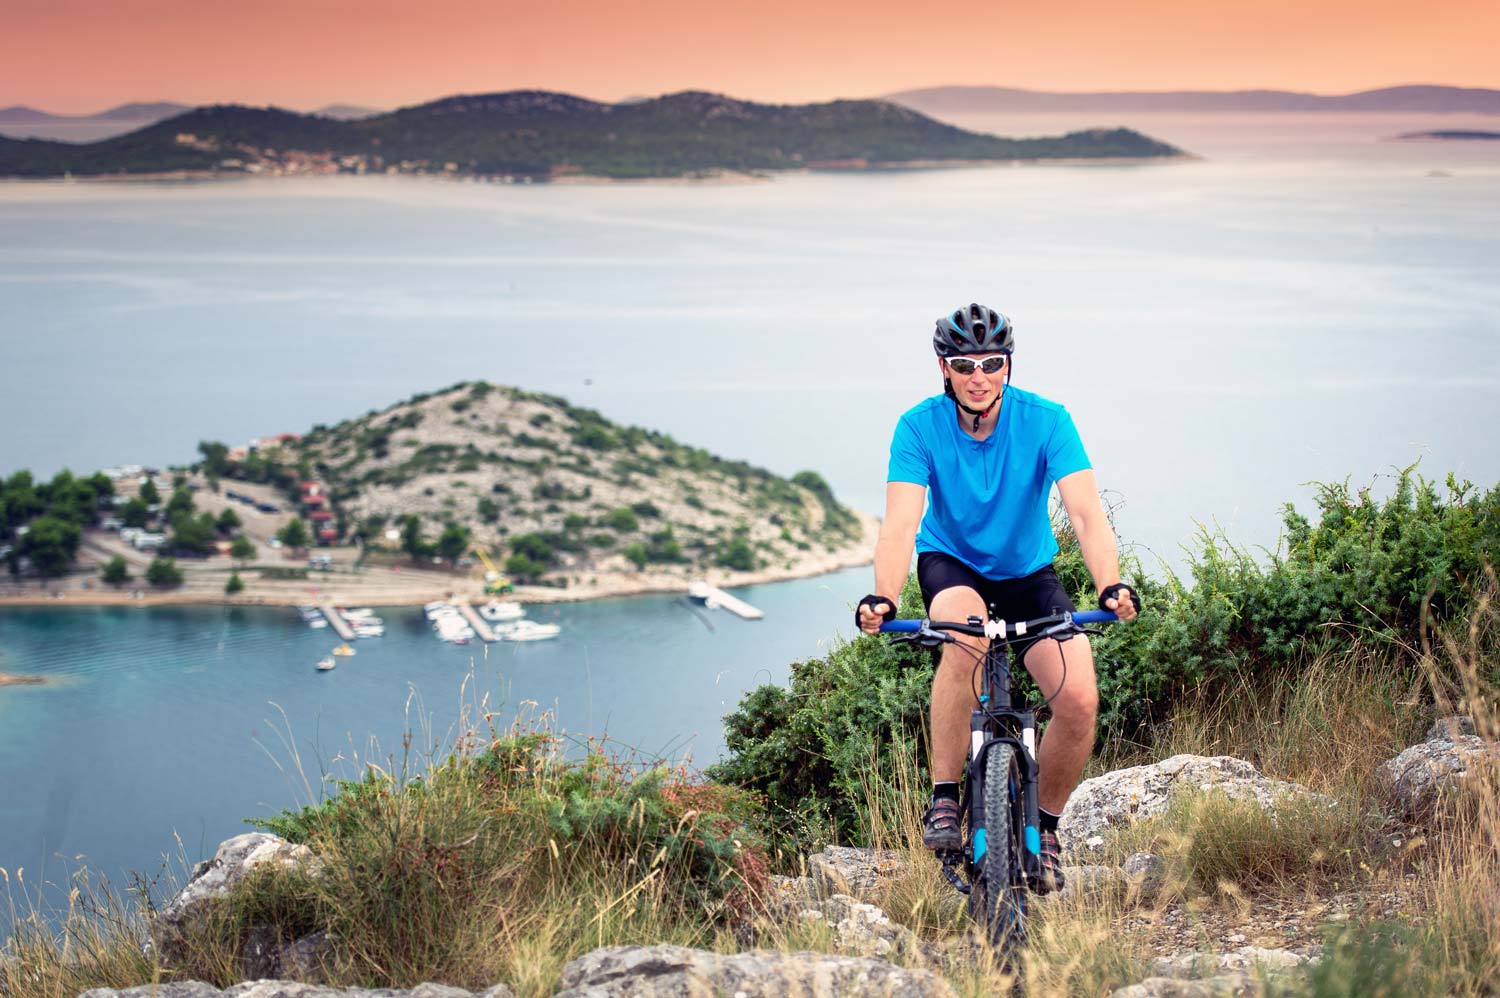 Photo showing a person mountain biking with the sea in the background